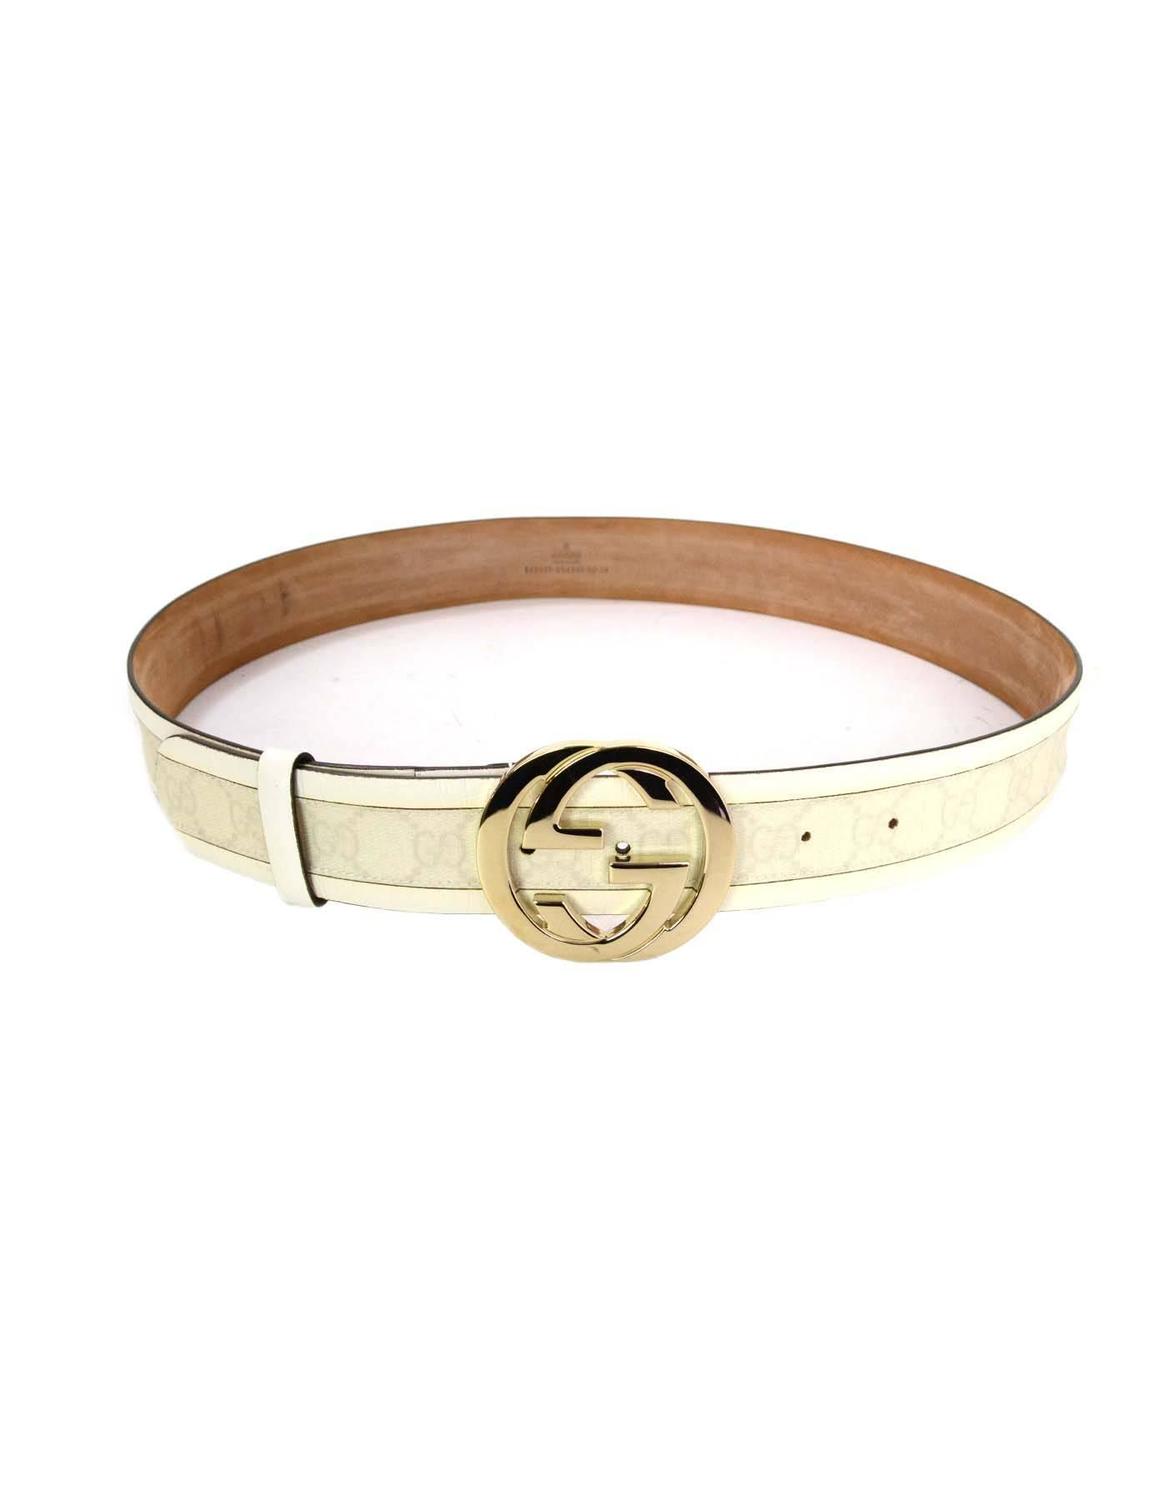 Gucci Monogram White Leather and Canvas Belt sz L SHW at 1stdibs